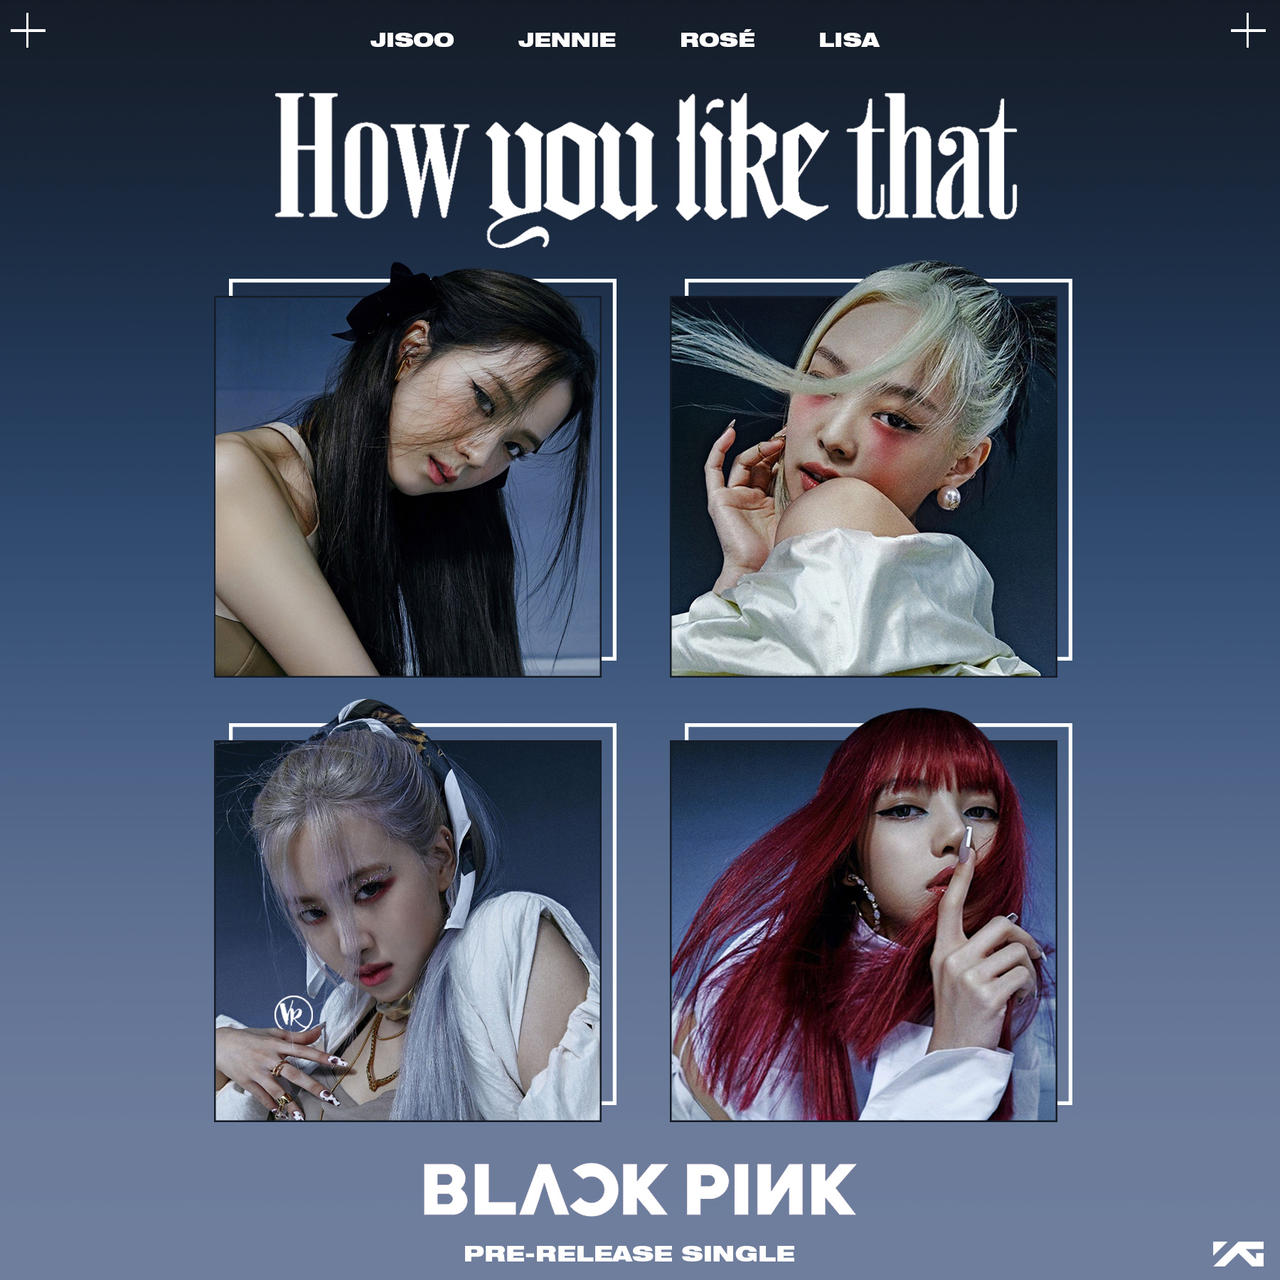 BLACKPINK - How You Like That (4) by vanessa-van3ss4 on DeviantArt